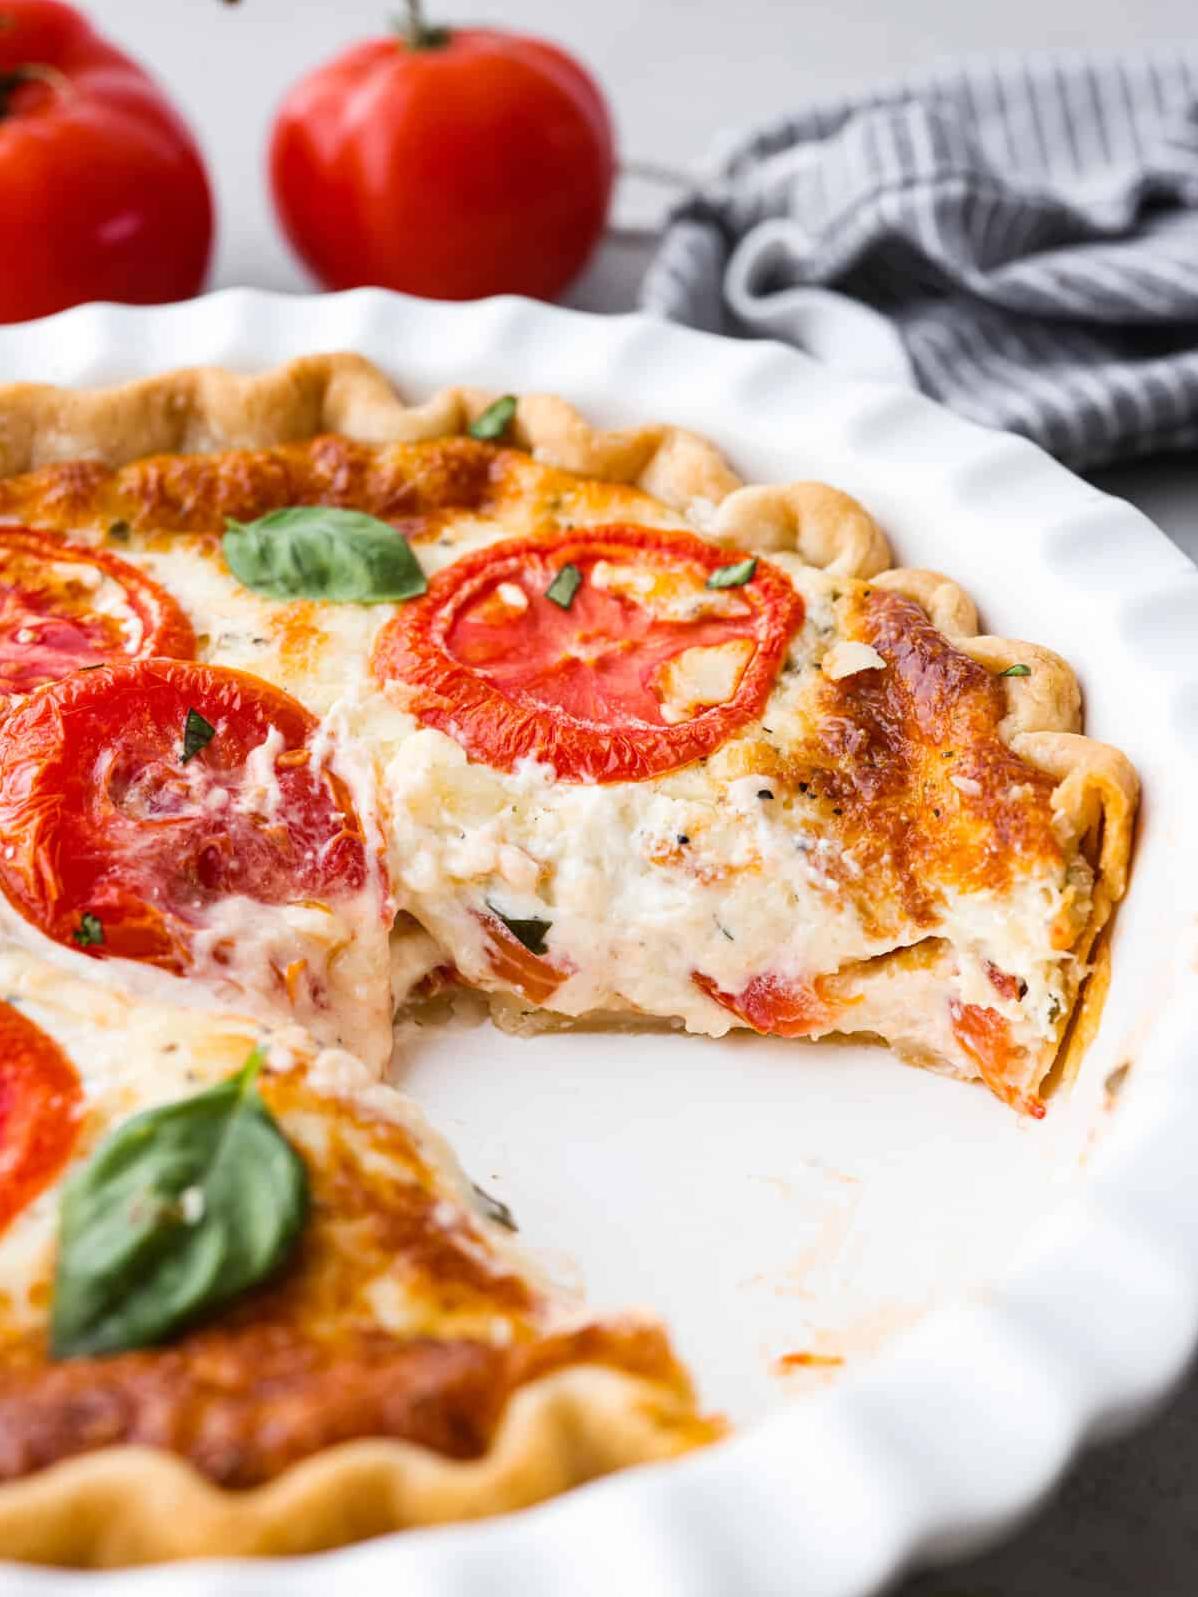  Tomato lovers unite! This pie is for you.